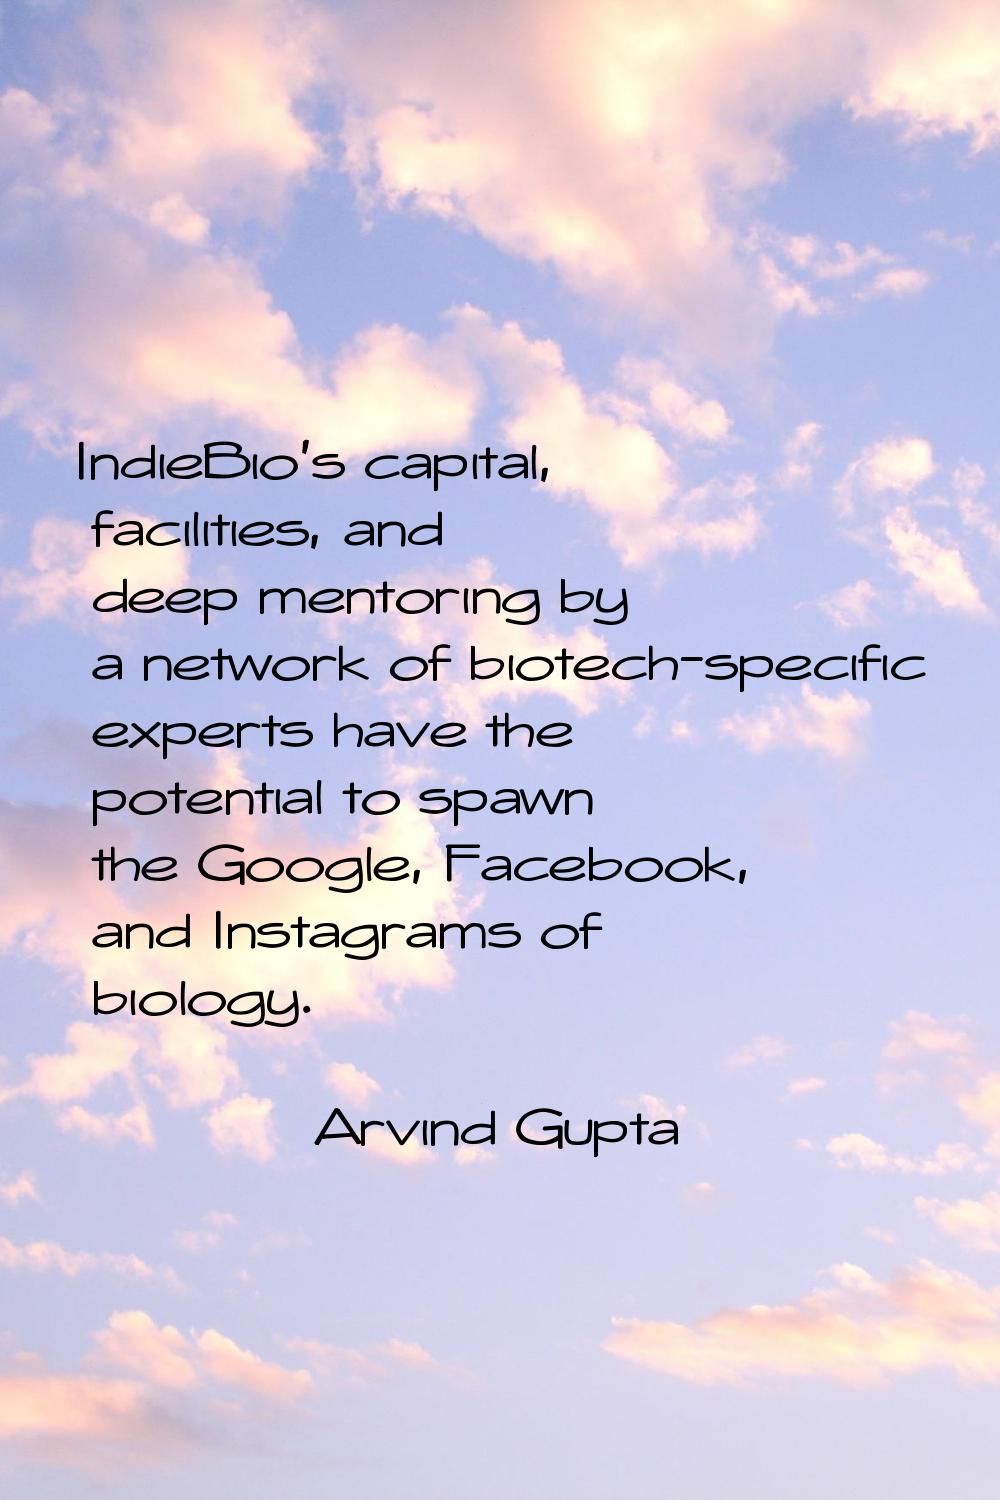 IndieBio's capital, facilities, and deep mentoring by a network of biotech-specific experts have th